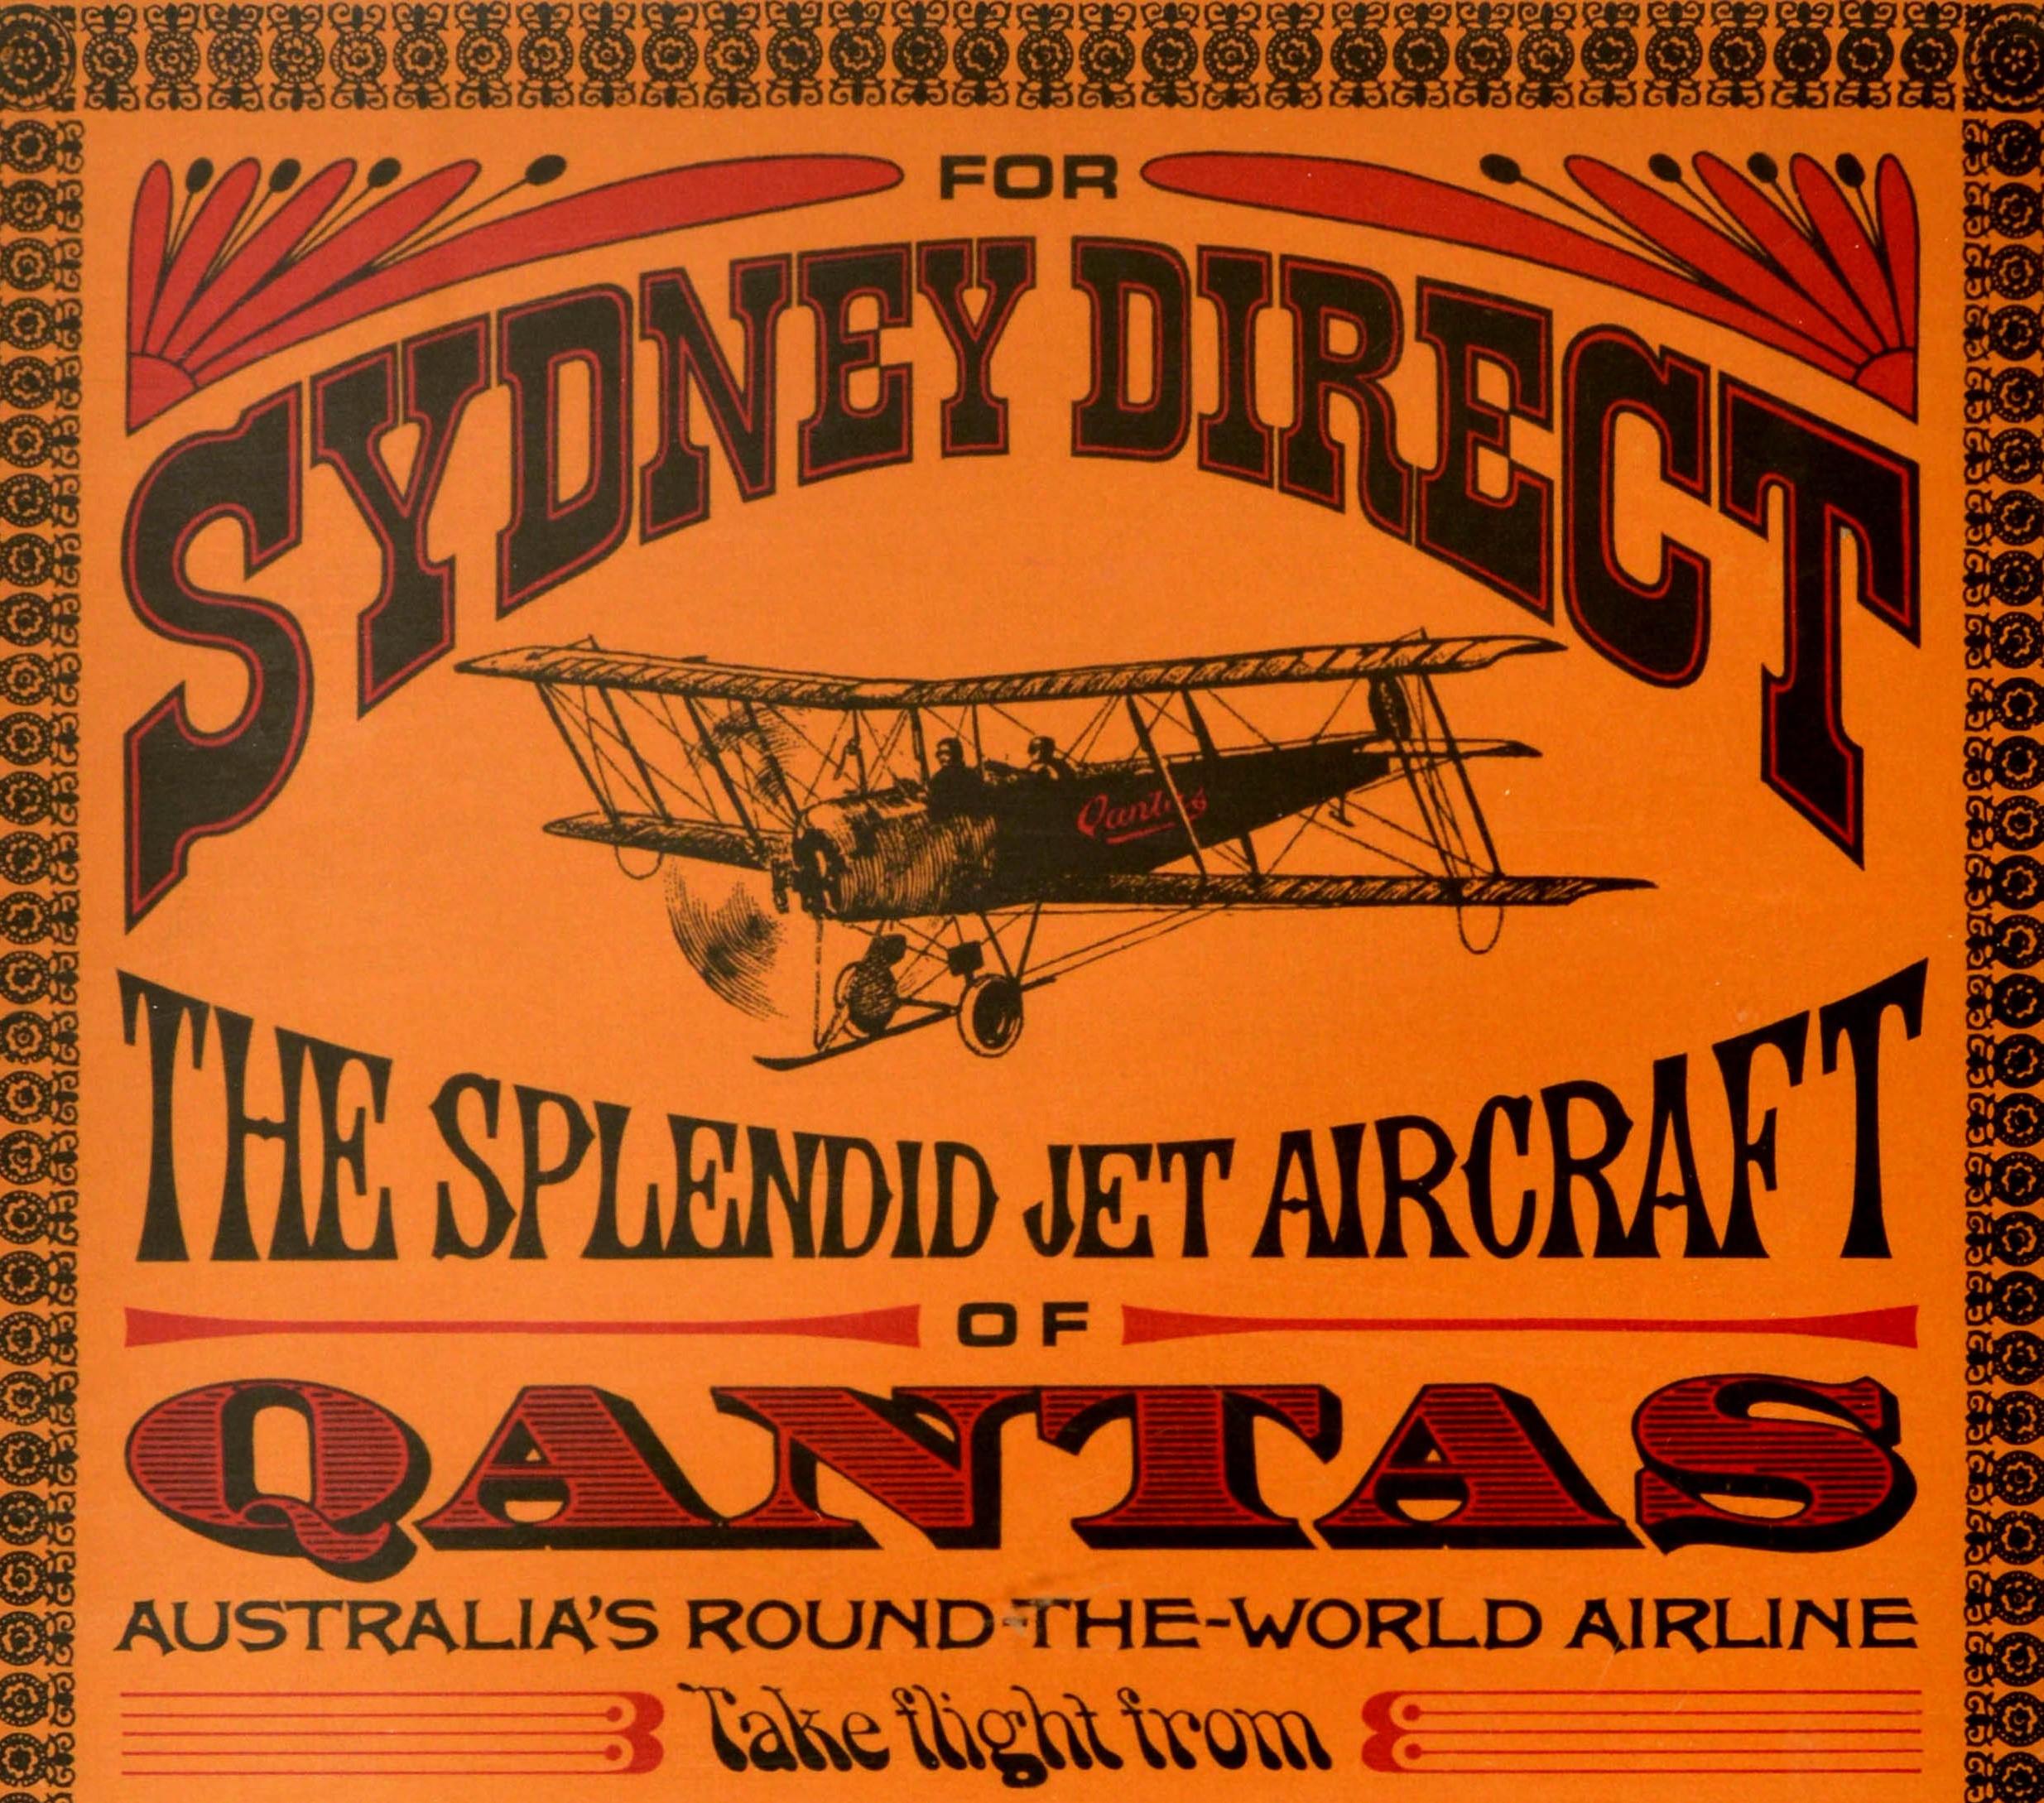 Original vintage travel poster featuring an old antique style advertising design with the bold lettering above and below an image of a bi-plane marked Qantas set within a decorative border - For Sydney Direct the splendid jet aircraft of Qantas